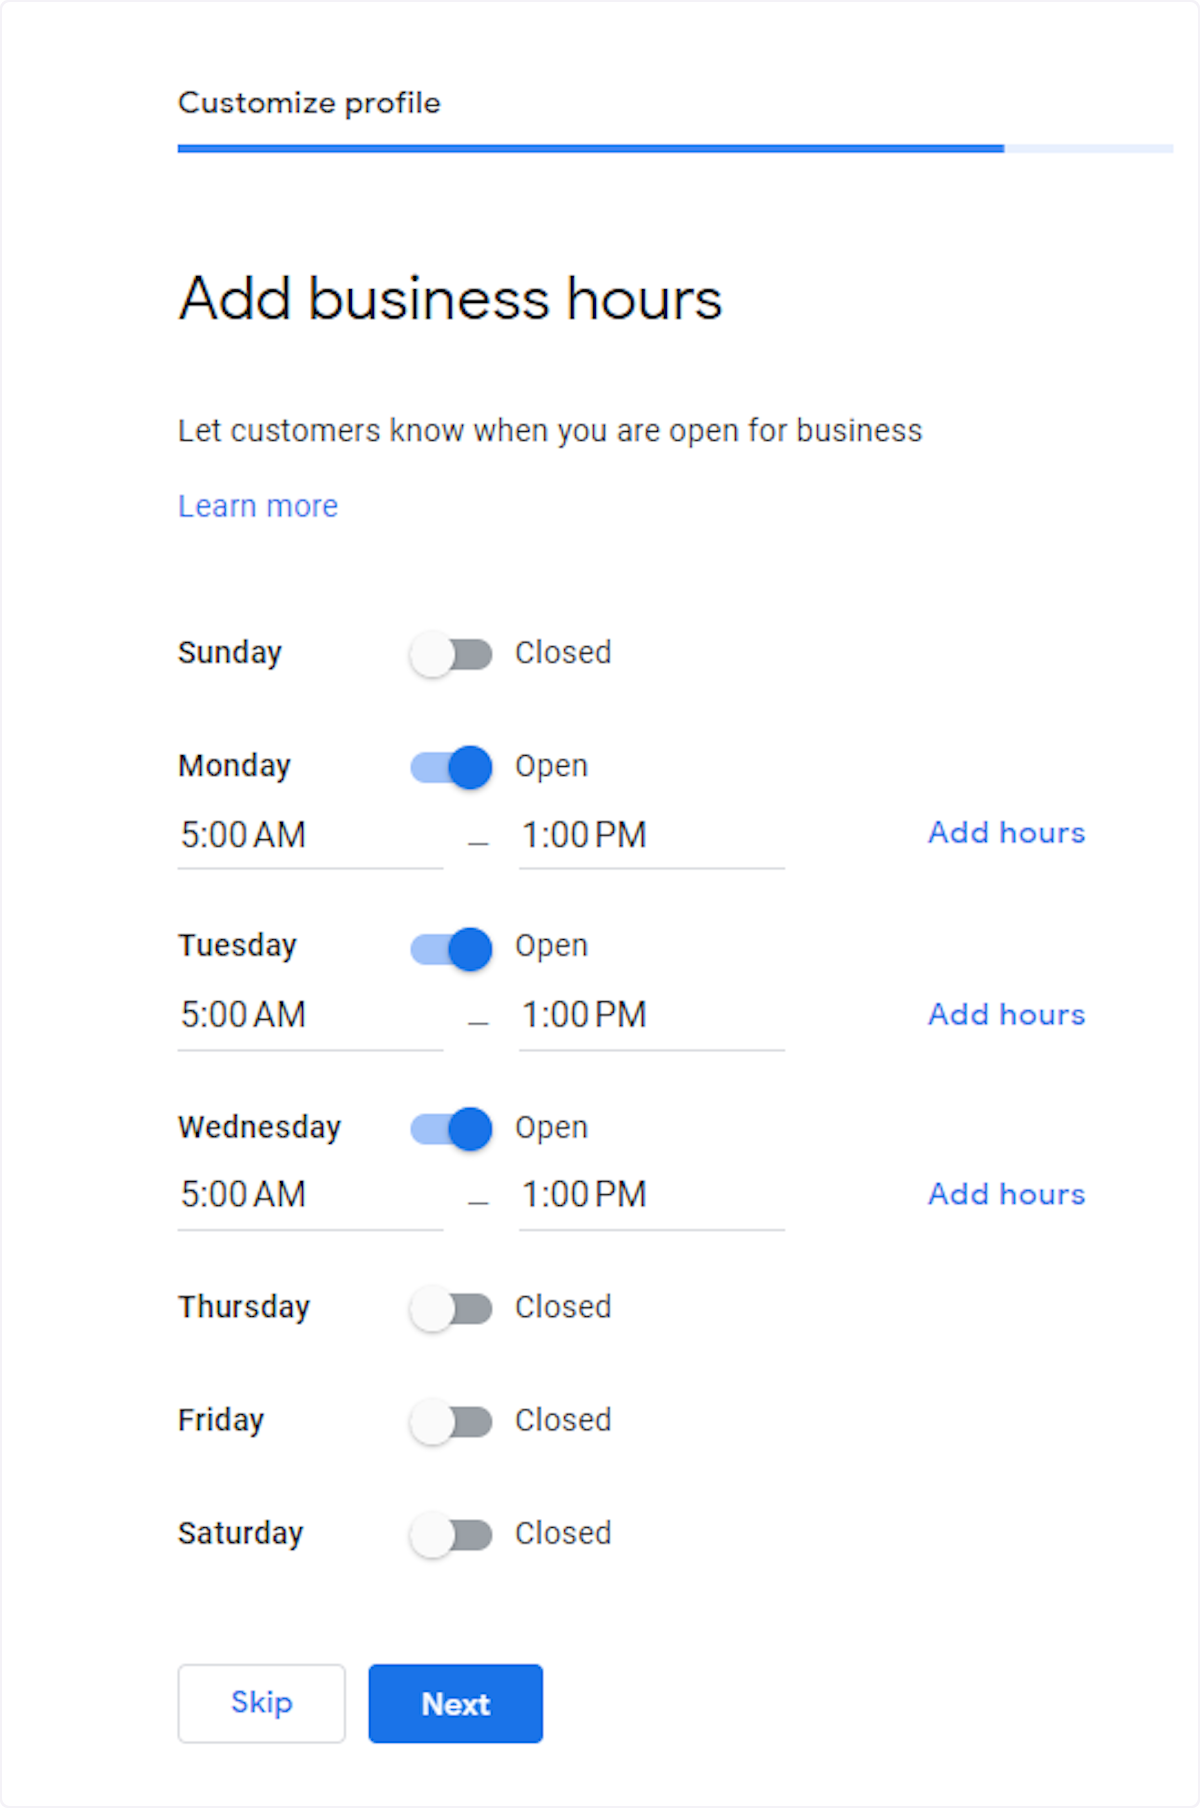 Optional: Add business hours